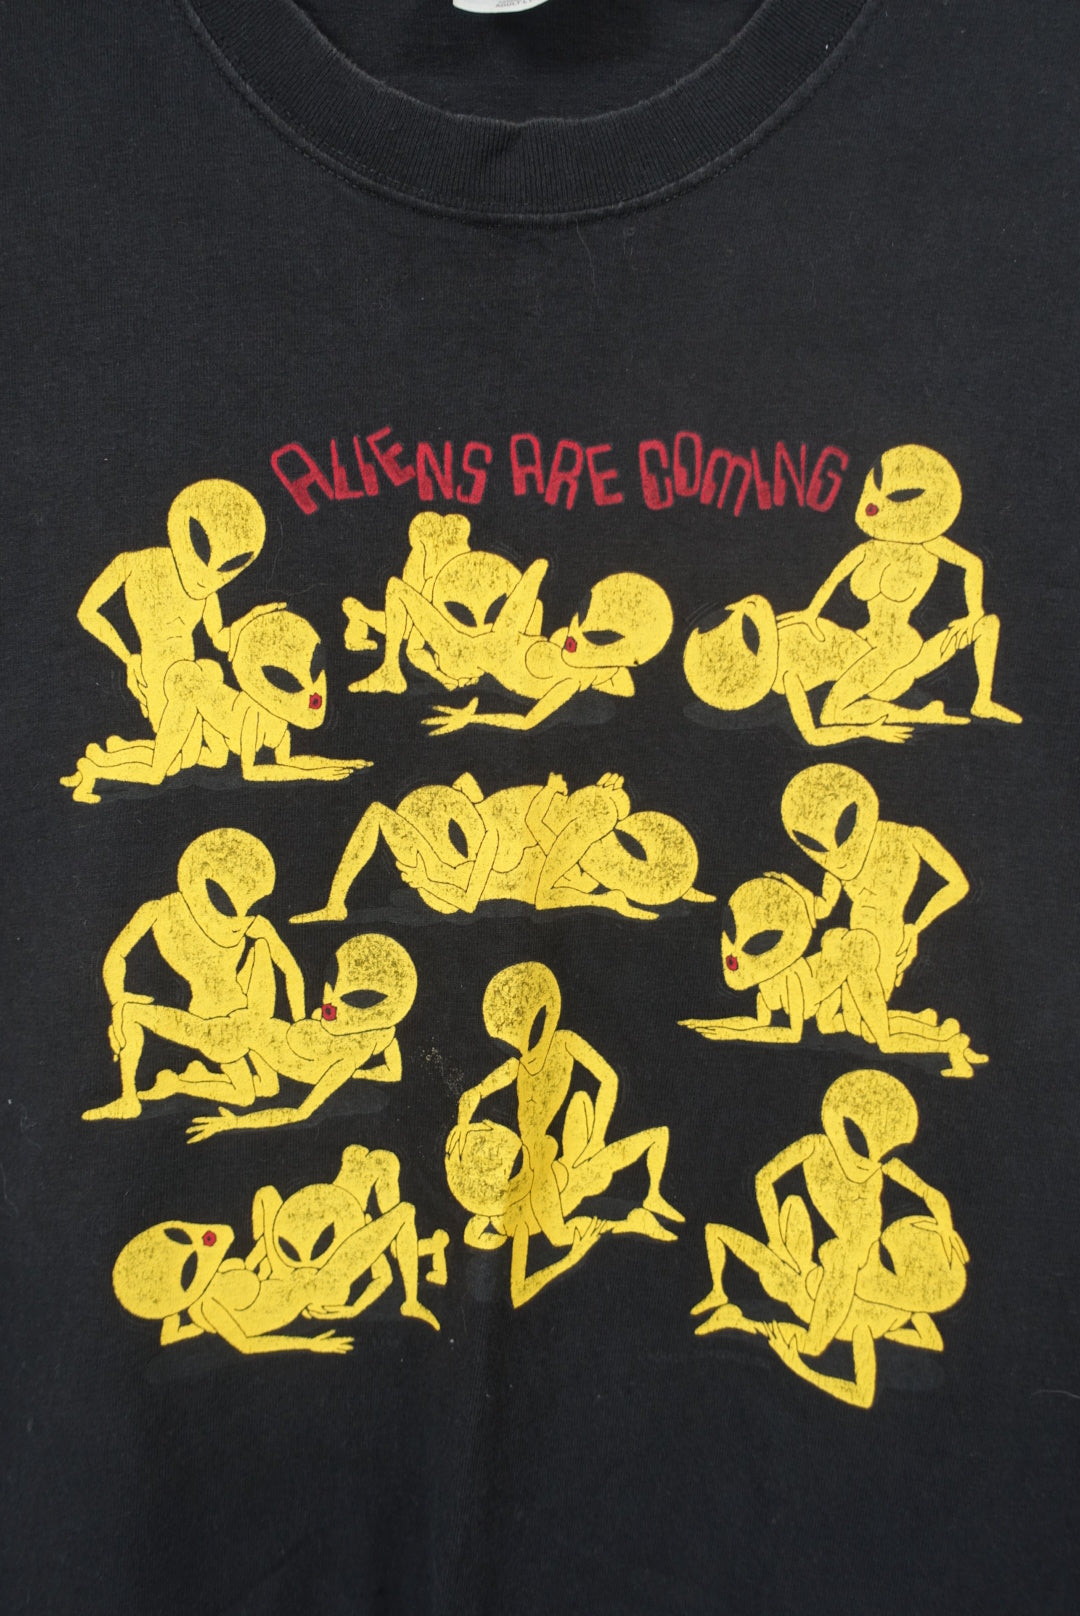 Vintage ‘Aliens Are Coming’ Sex Graphic T Shirt